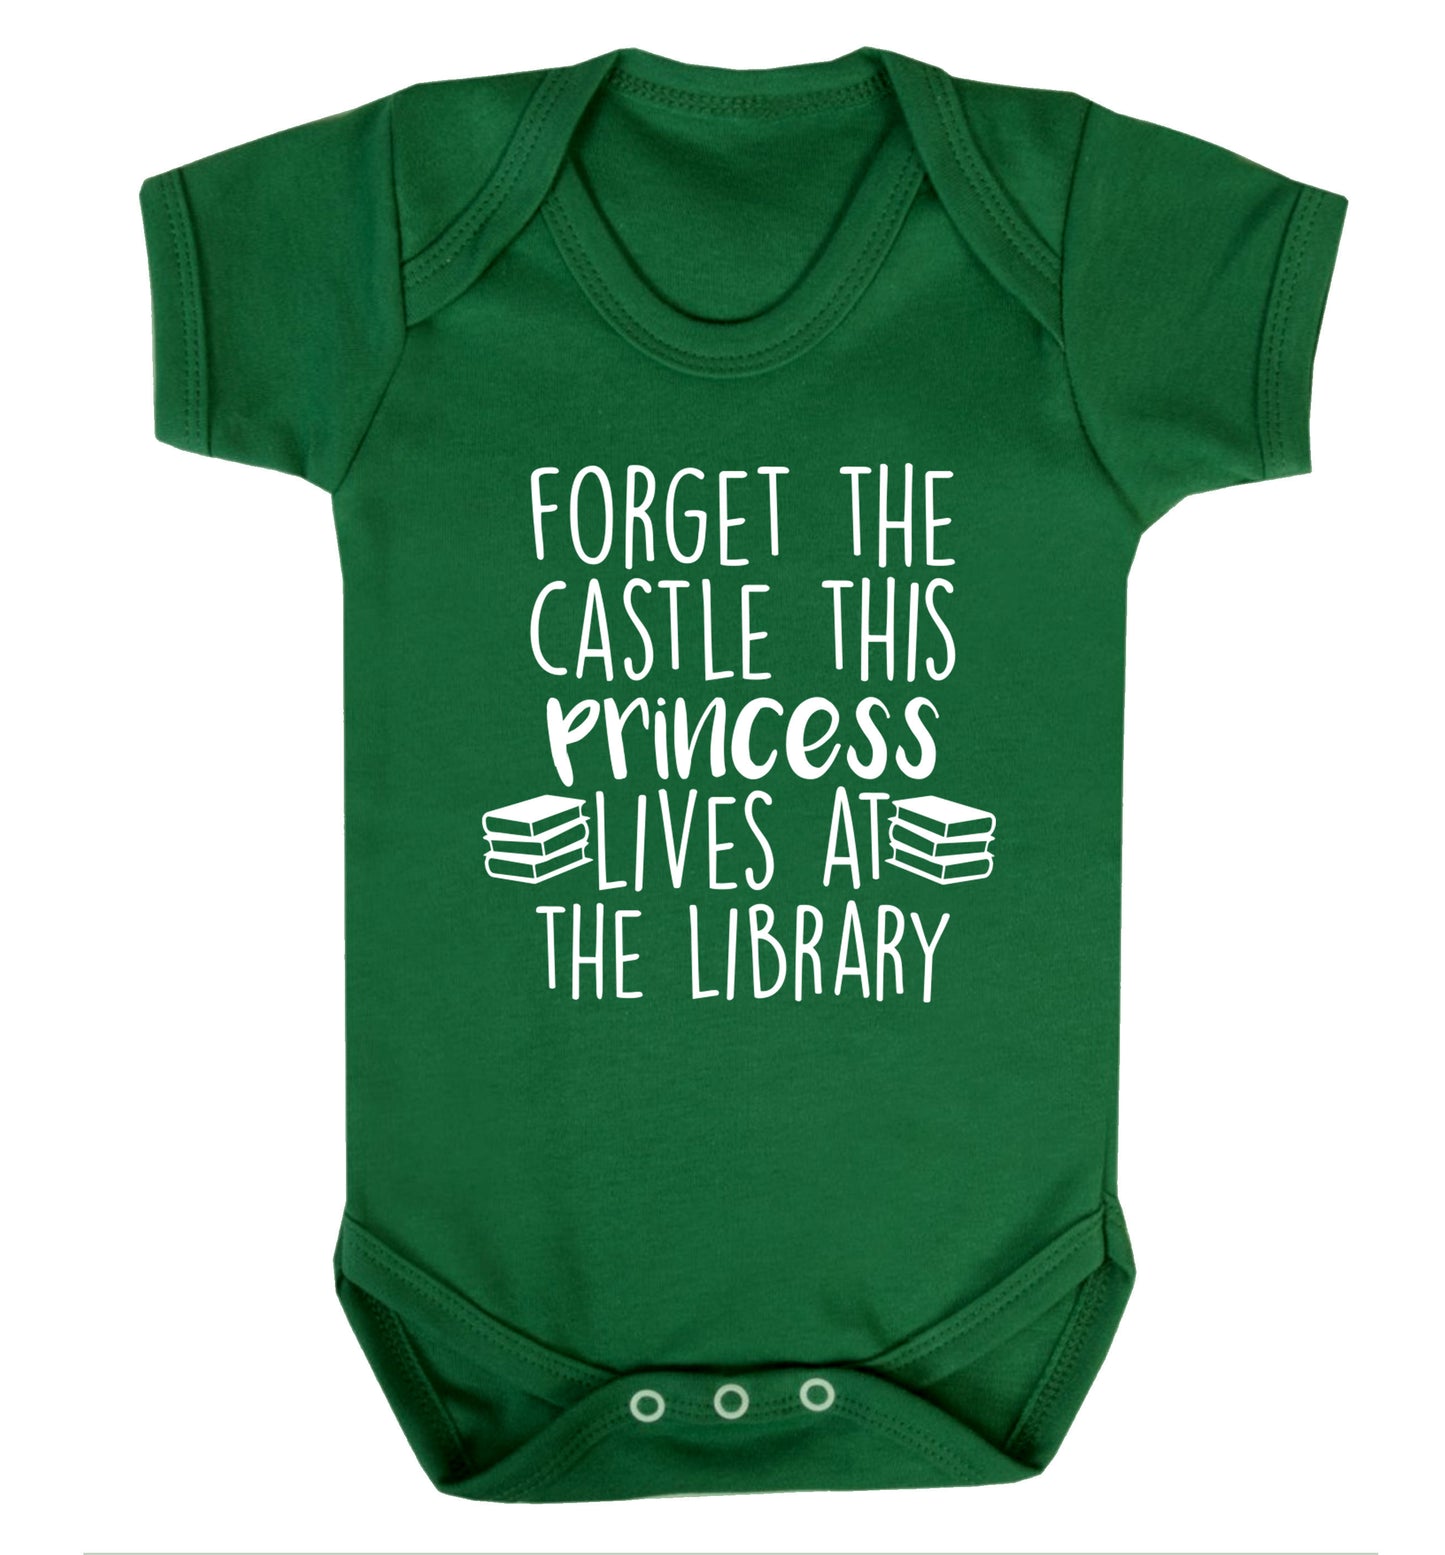 Forget the castle this princess lives at the library Baby Vest green 18-24 months